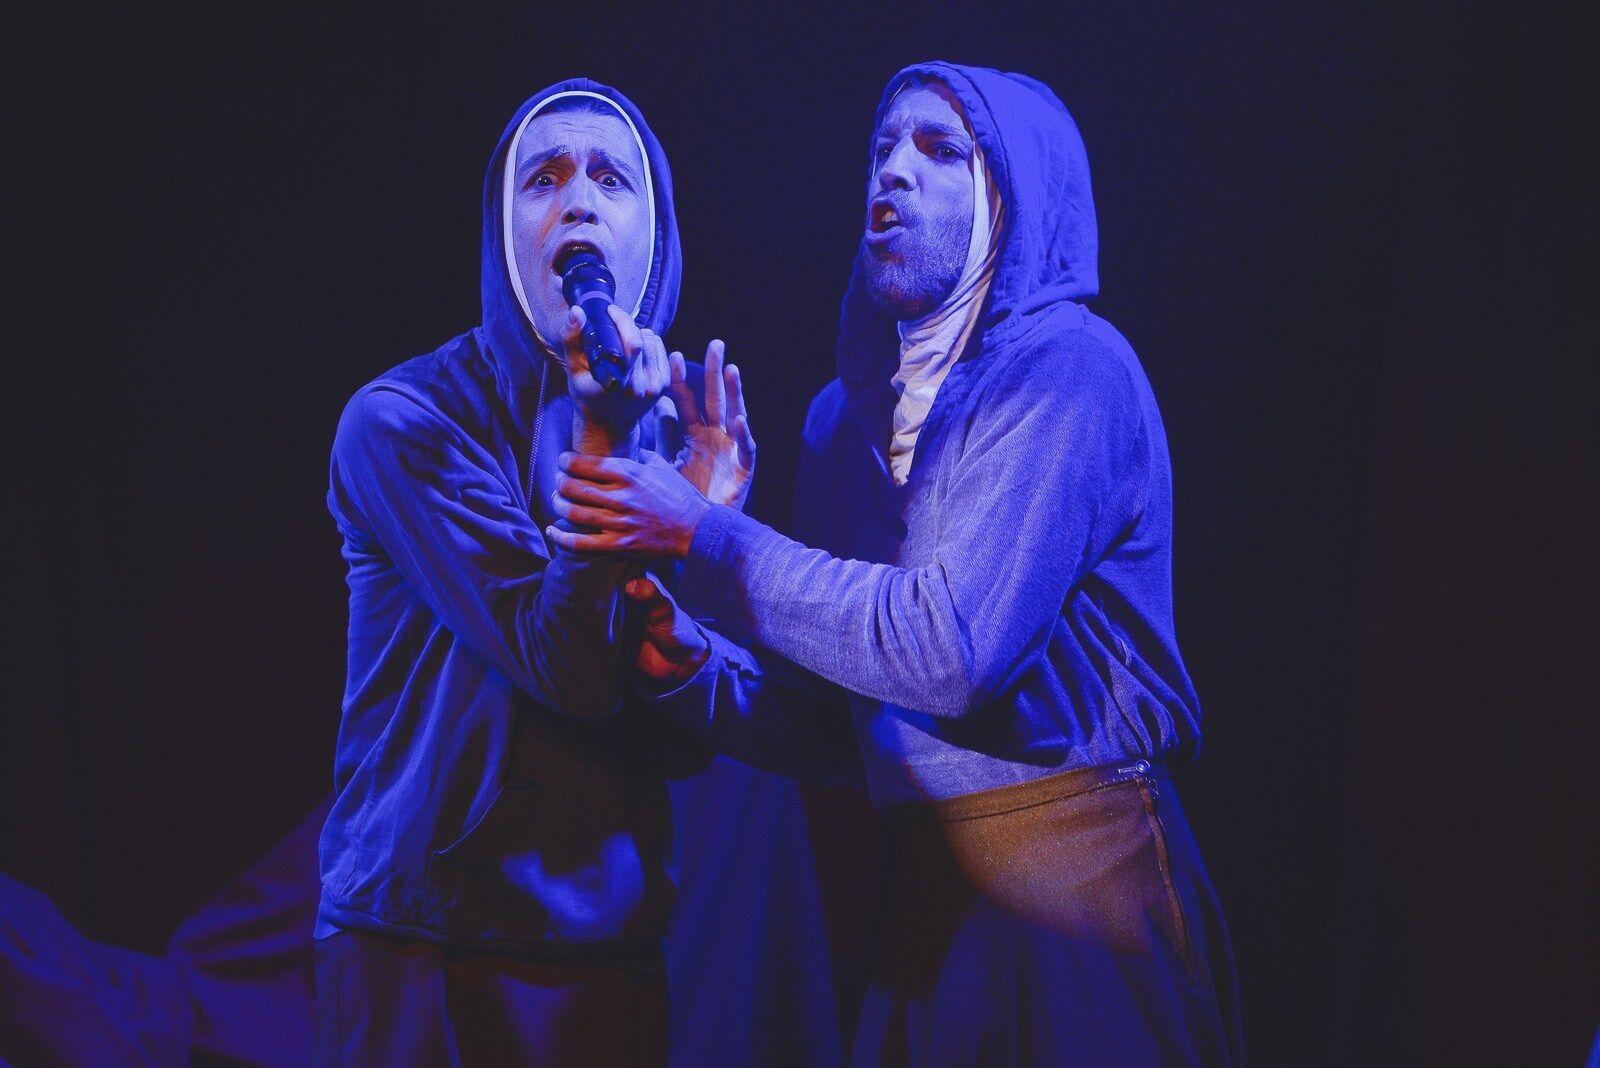 two men looking distressed a lit by blue light and speak in microphones wearing robes